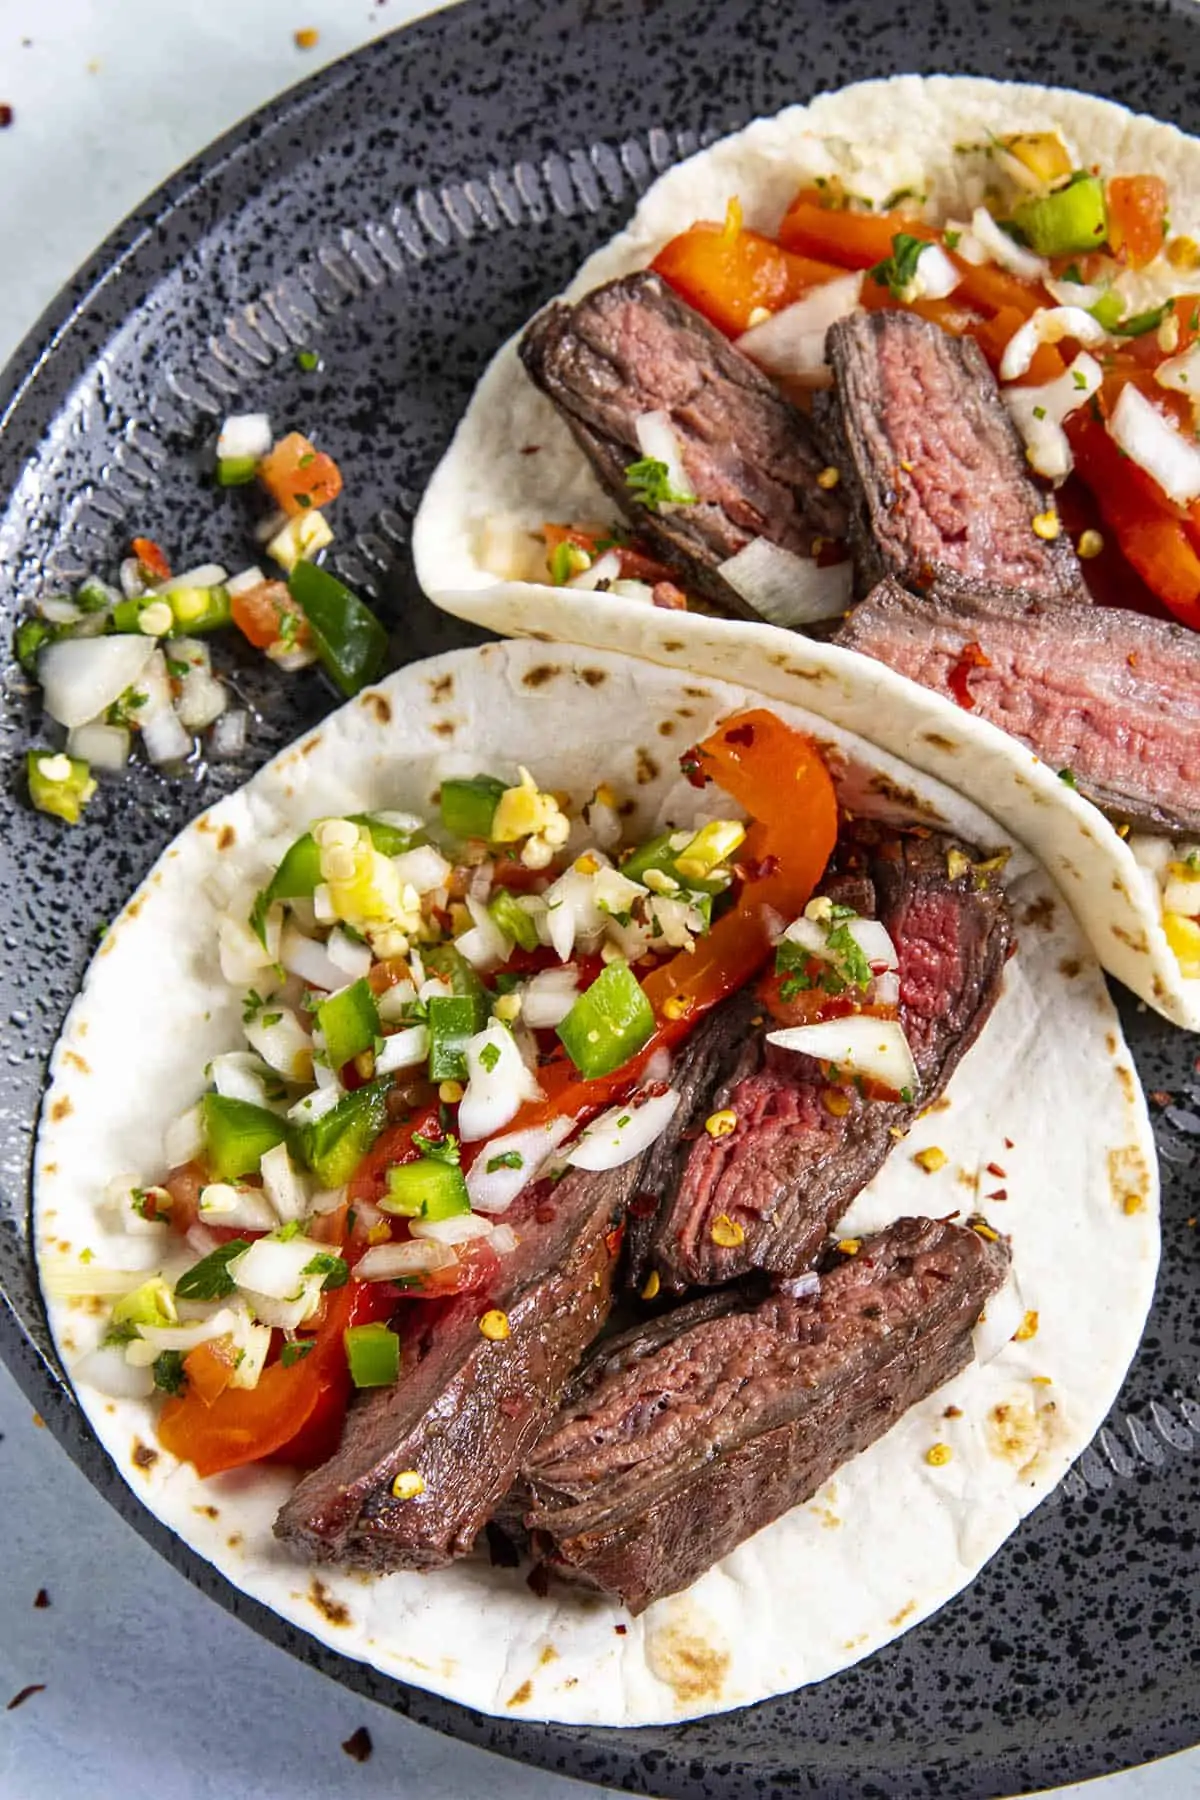 Two charcoal grilled steak tacos with pico de gallo and grilled red pepper